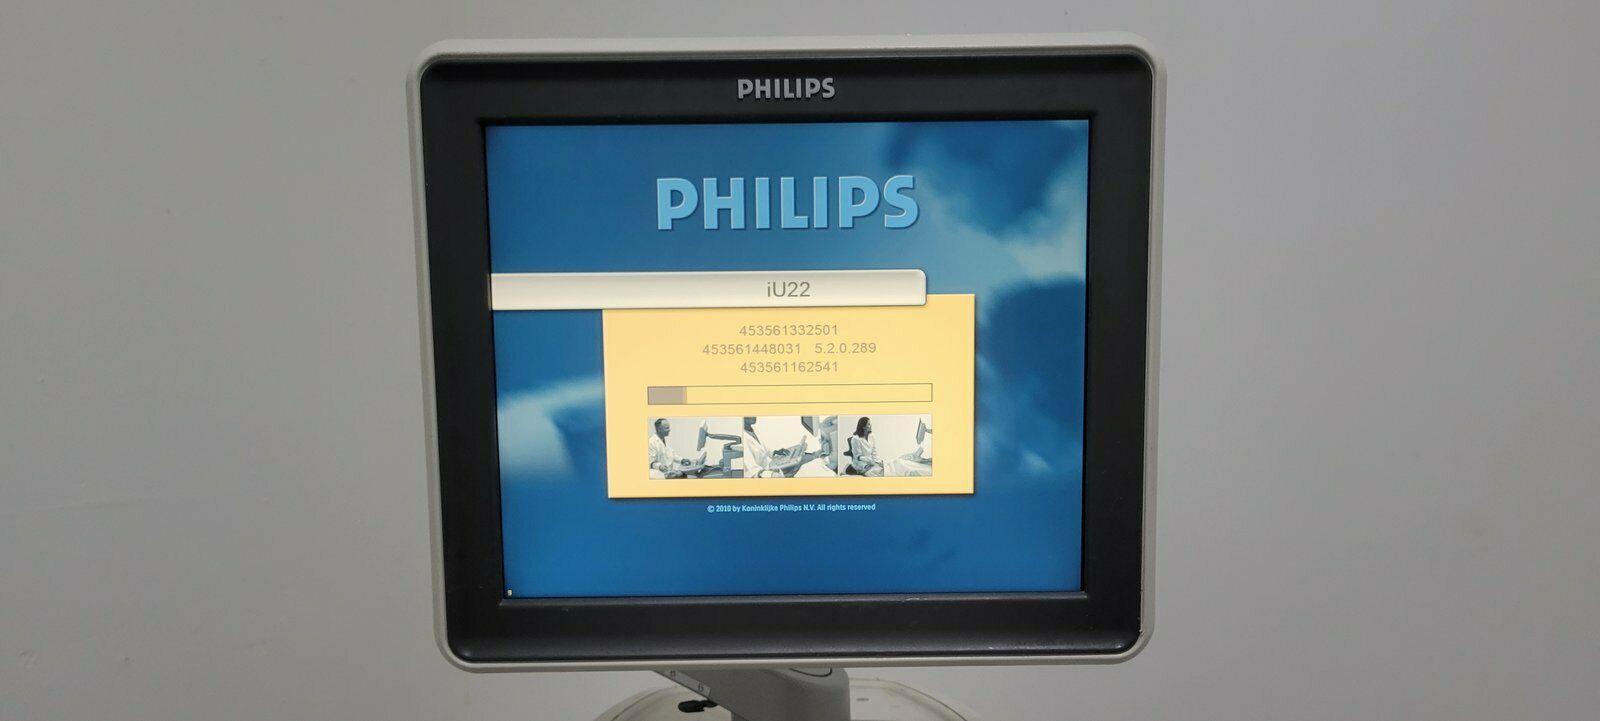 PHILIPS IU22 ULTRASOUND SYSTEM PARTS OR REPAIR DIAGNOSTIC ULTRASOUND MACHINES FOR SALE